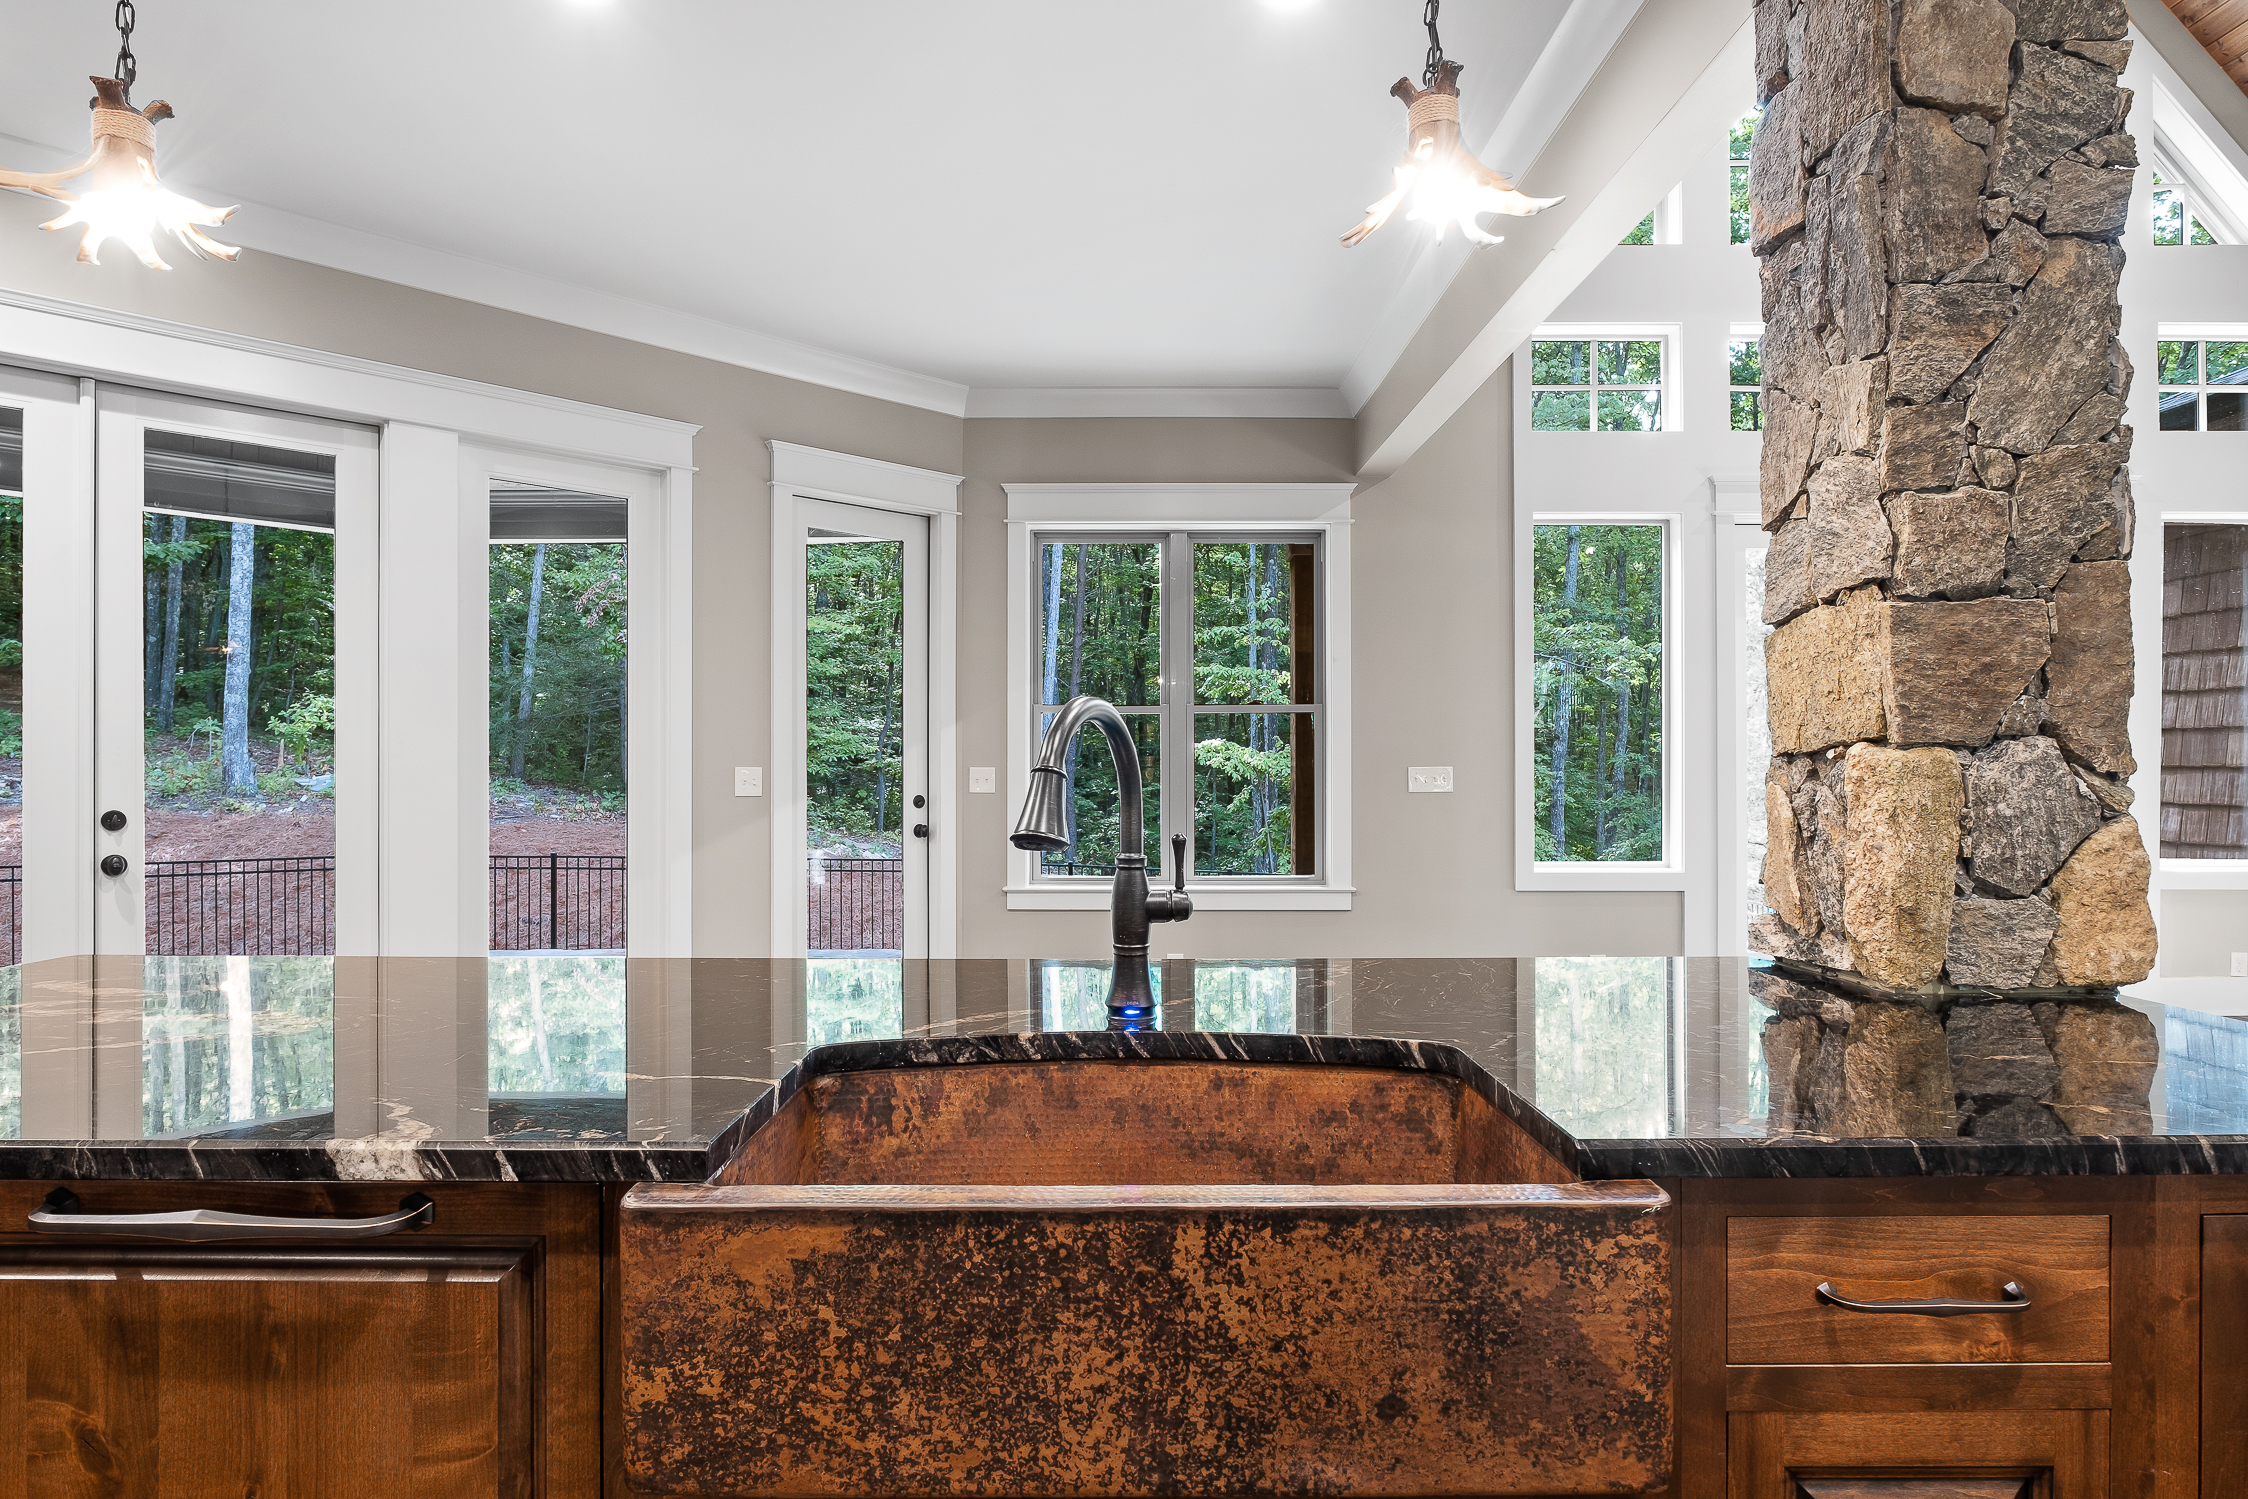 Country kitchen sink designs with brown cabinets amazing marble countertops